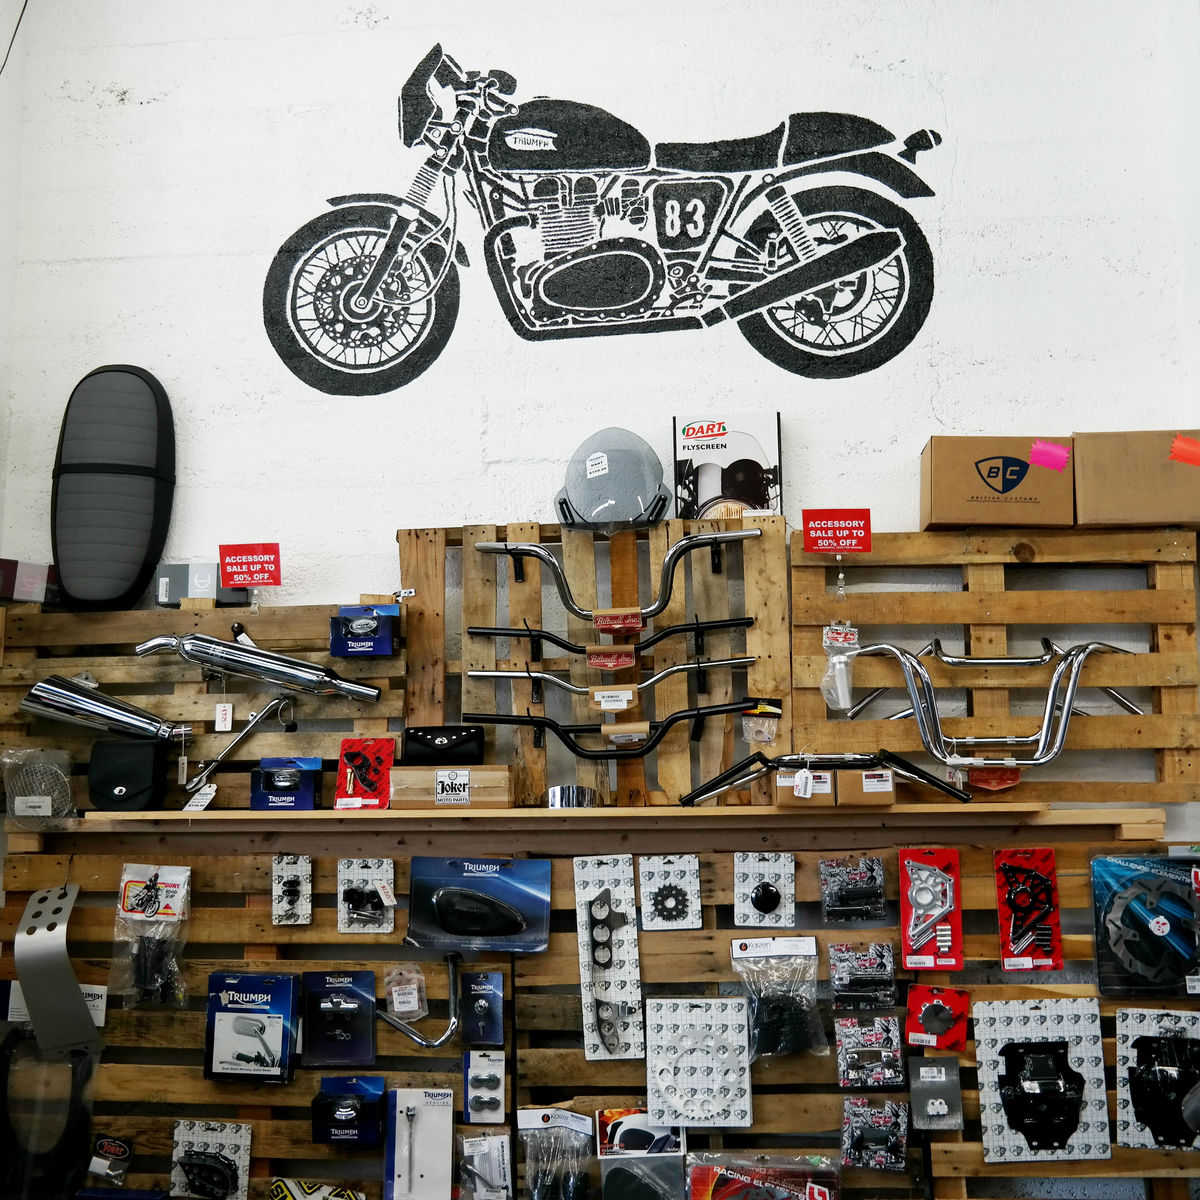 Handlebars, gears, and other components attached to wall-mounted wooden pallets in the Triumph of …